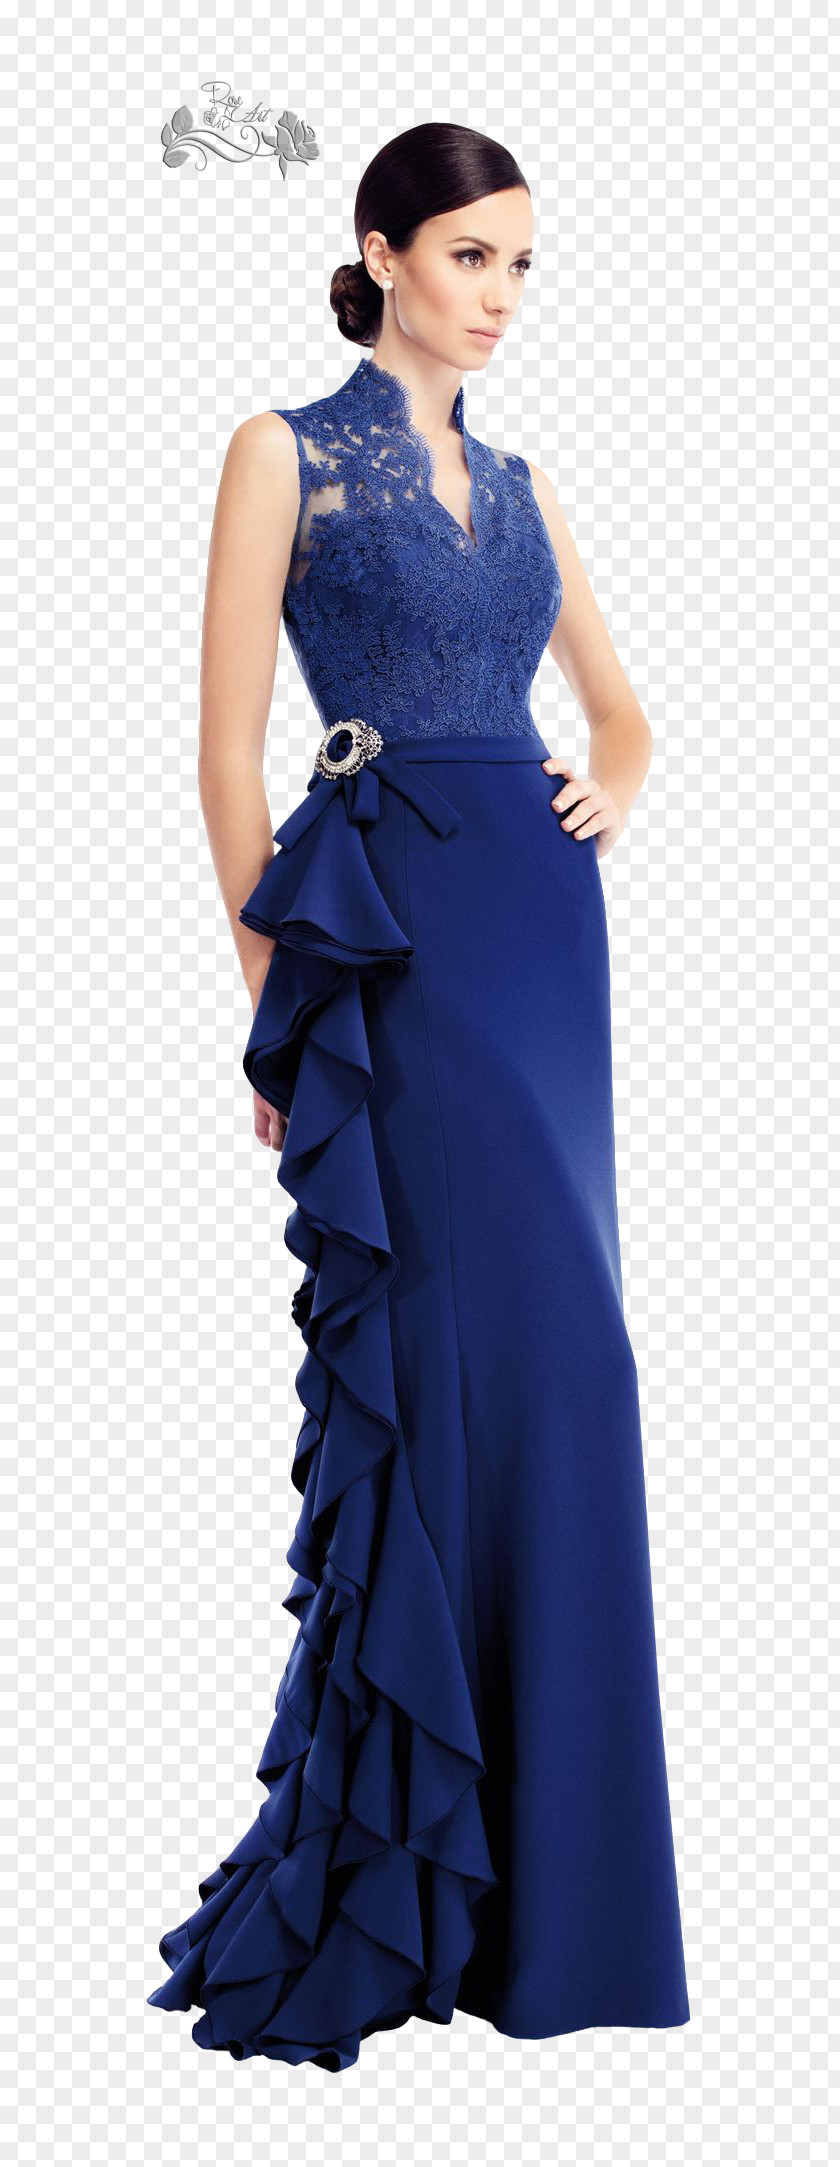 Blue Evening Gown Cocktail Dress Clothing PNG